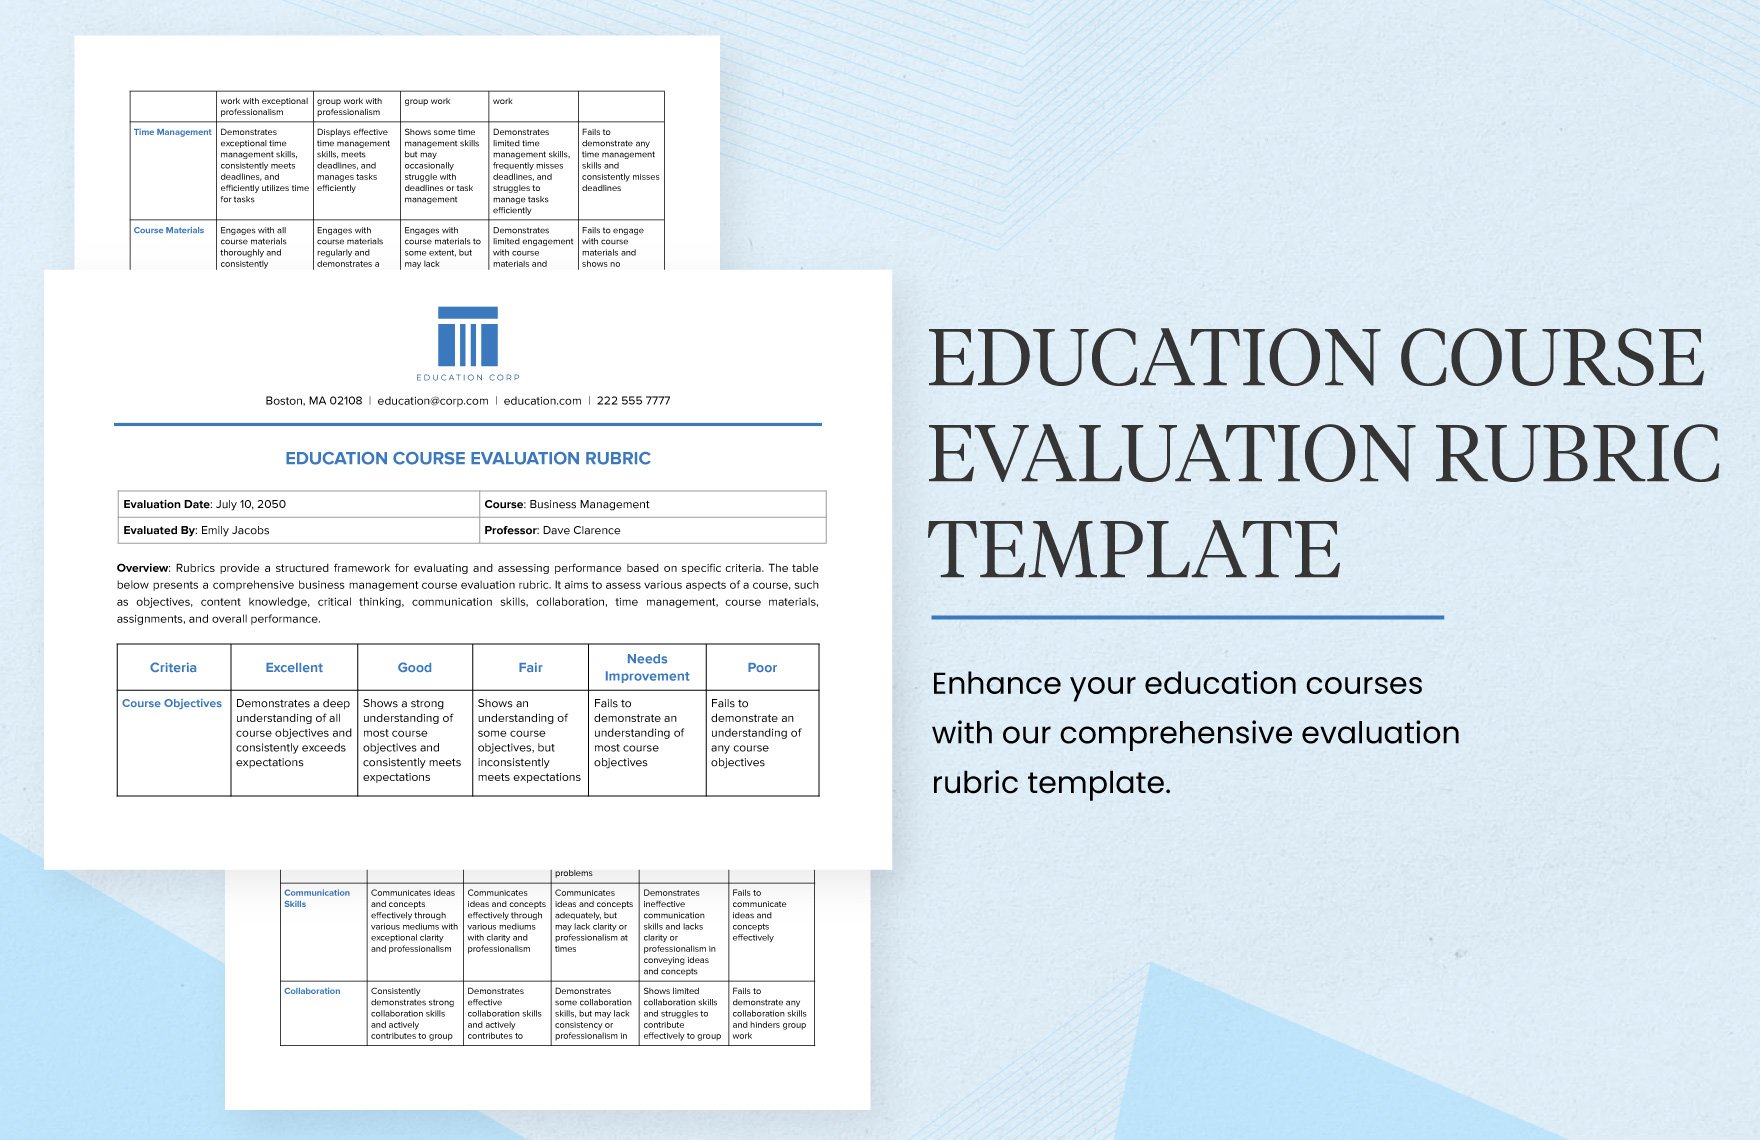 Education Course Evaluation Rubric Template in Word, Google Docs